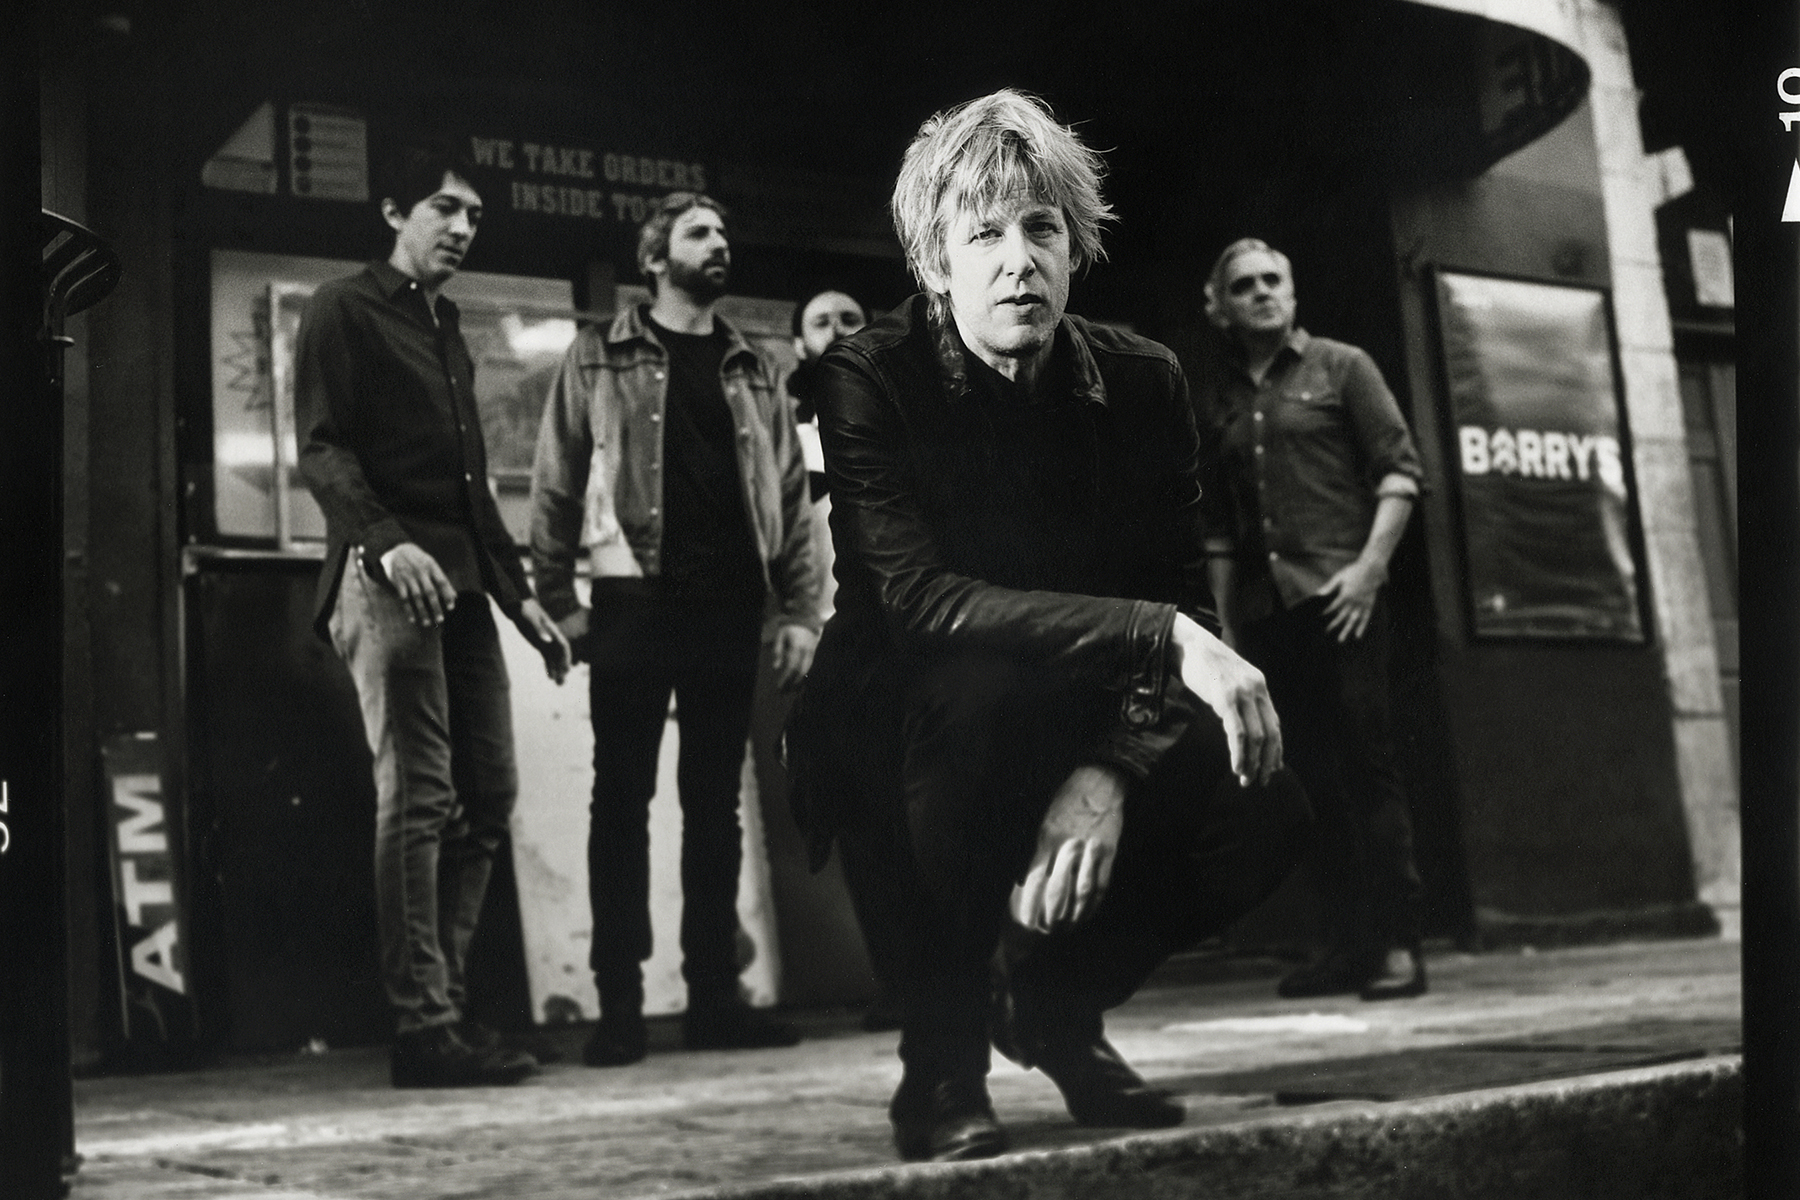 Spoon Drop ‘My Babe’ Video and Remix